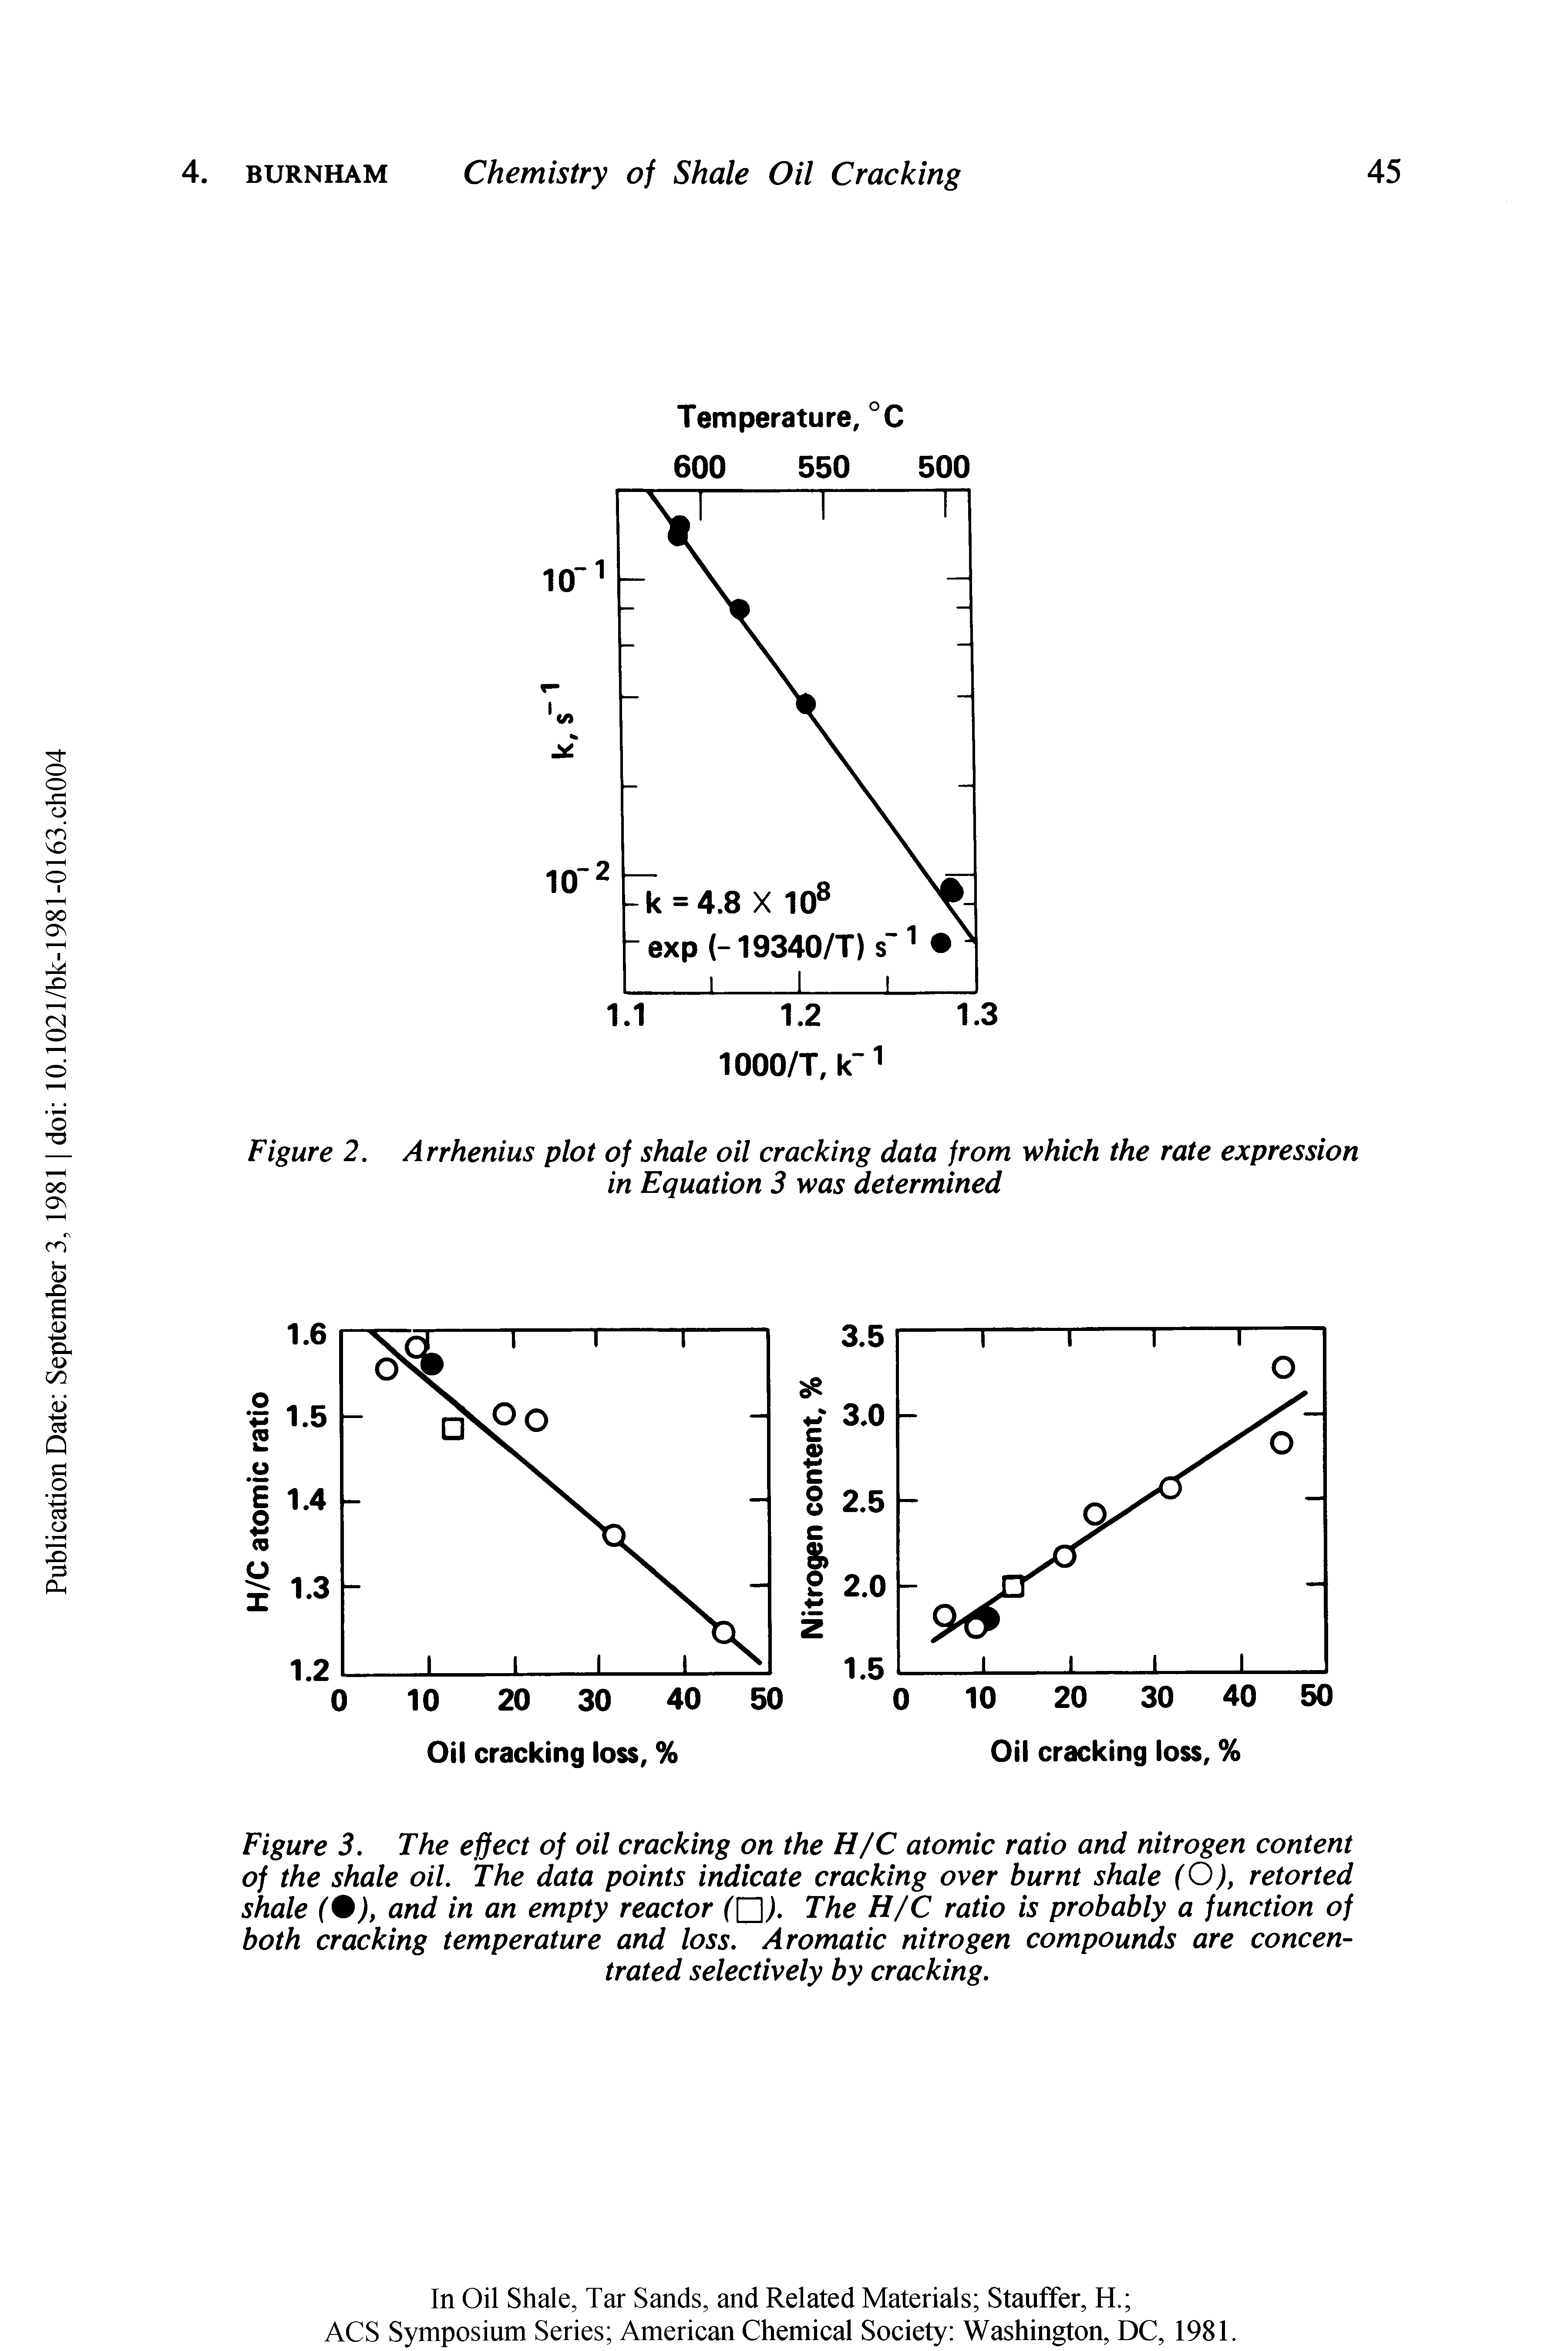 Figure 3. The effect of oil cracking on the H/C atomic ratio and nitrogen content of the shale oil. The data points indicate cracking over burnt shale (O), retorted shale (%), and in an empty reactor ([J). The H/C ratio is probably a function of both cracking temperature and loss. Aromatic nitrogen compounds are concentrated selectively by cracking.